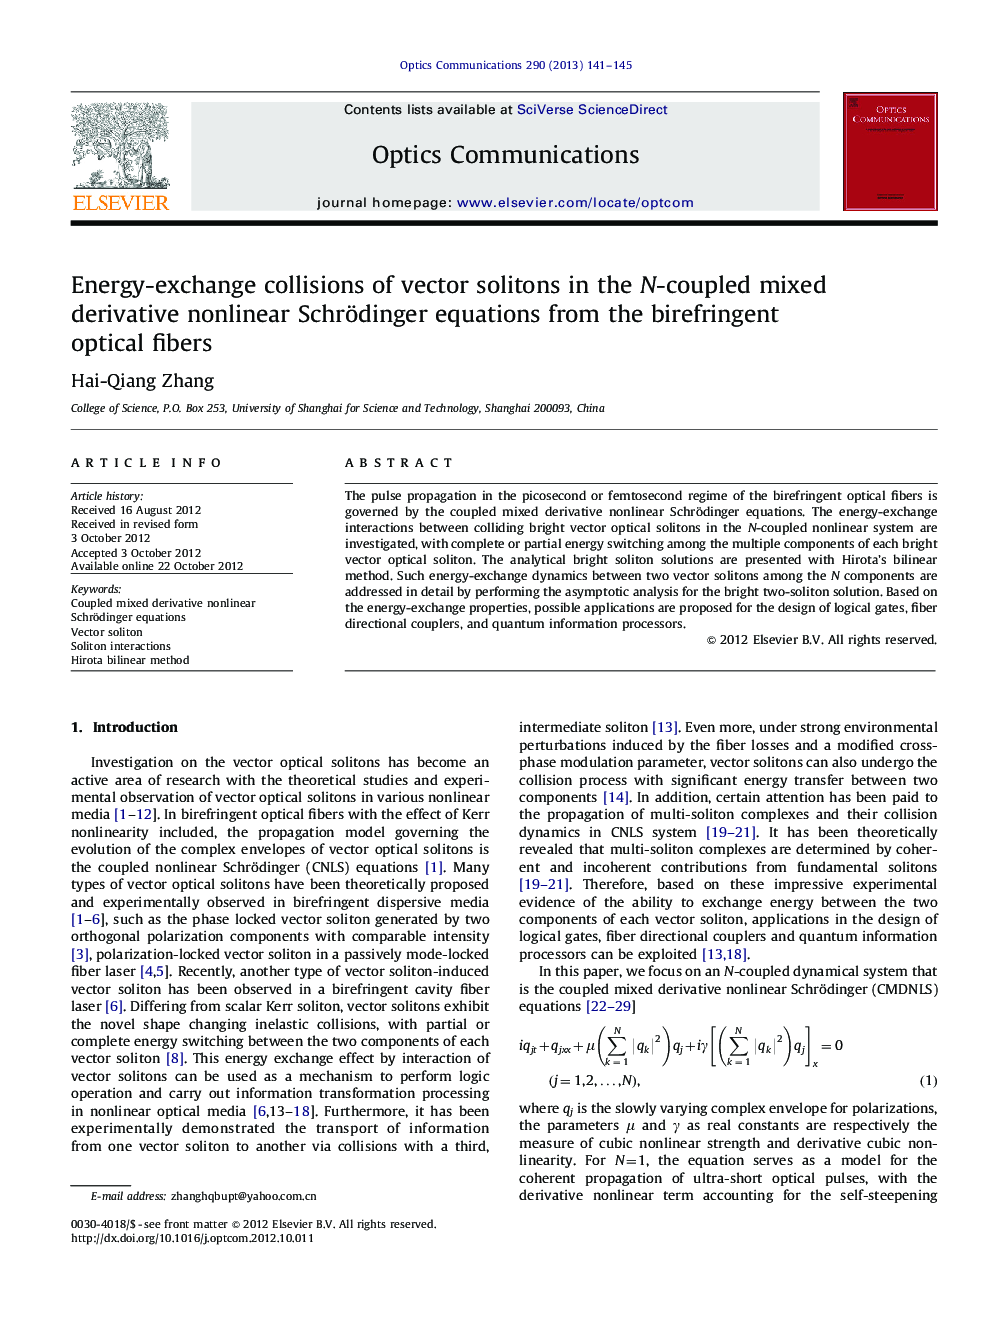 Energy-exchange collisions of vector solitons in the N-coupled mixed derivative nonlinear Schrödinger equations from the birefringent optical fibers